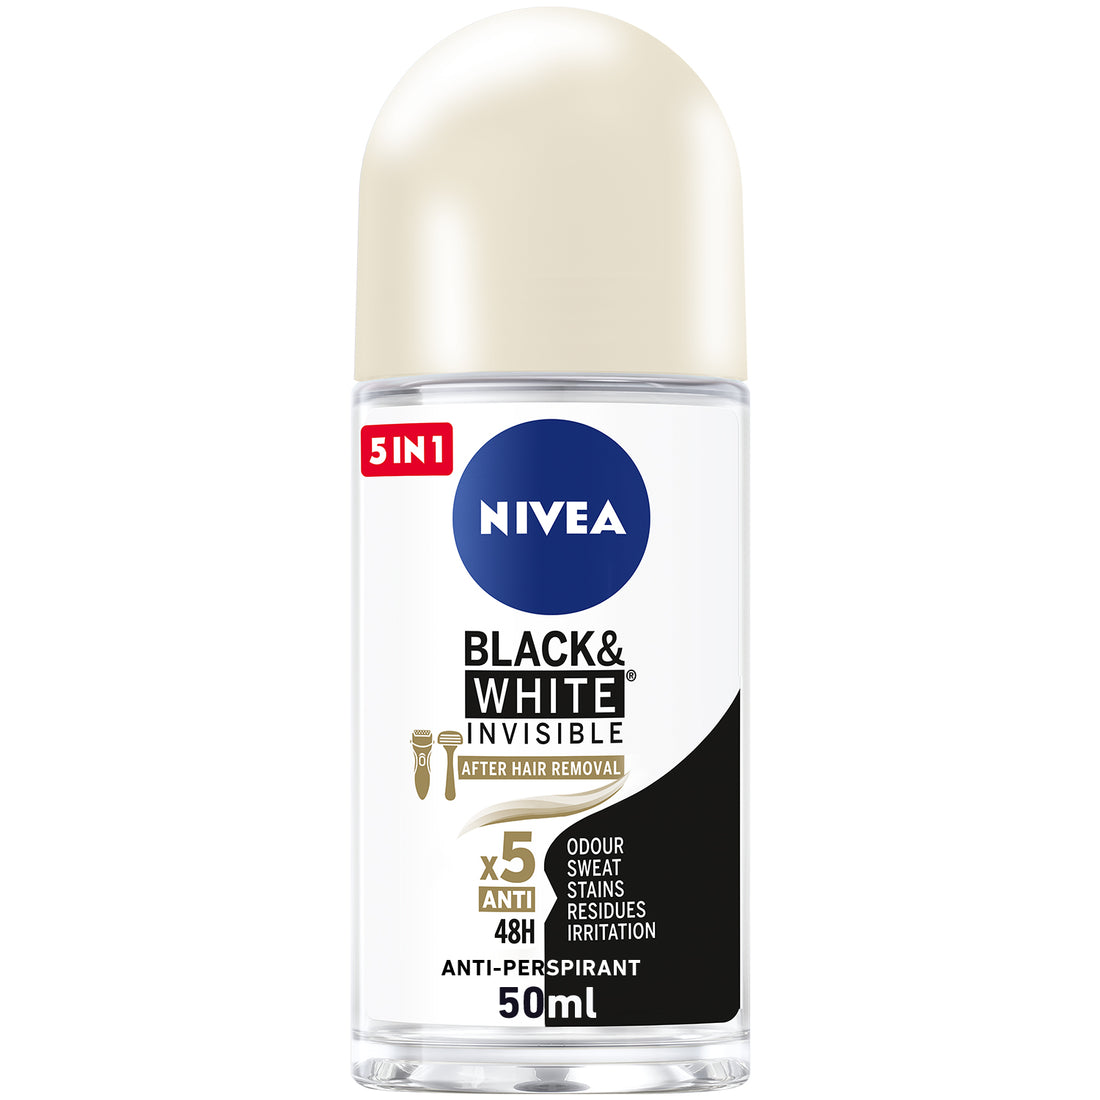 Nivea Black &amp; White Invisible Silky Smooth, Antiperspirant for Women, Roll-on 50ml